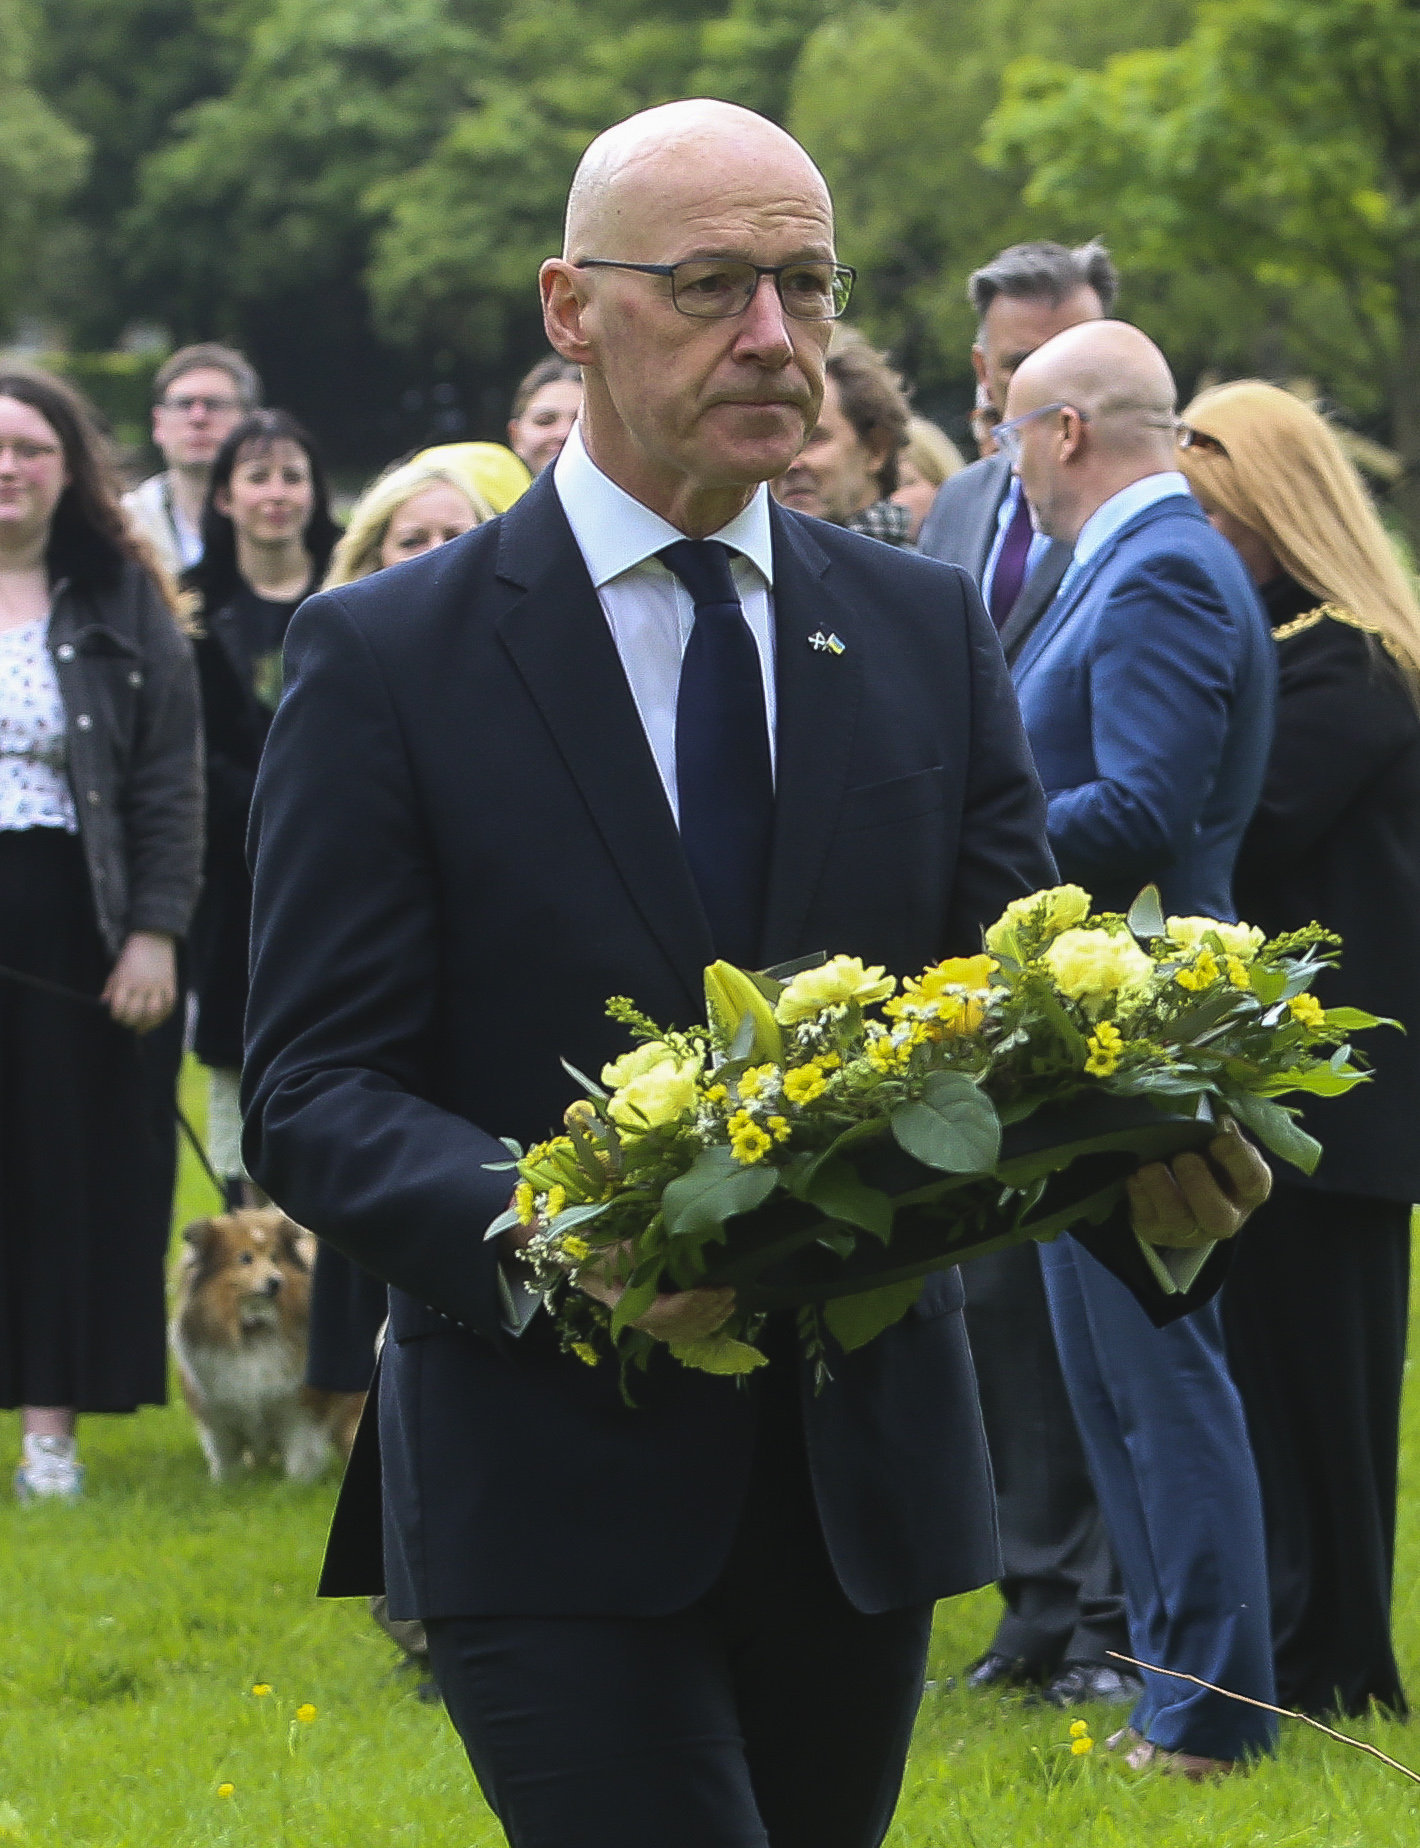 Deputy First Minister John Swinney laid a wreath and joined families on a walk through the garden. Photo Gordon Terris Herald & Times.